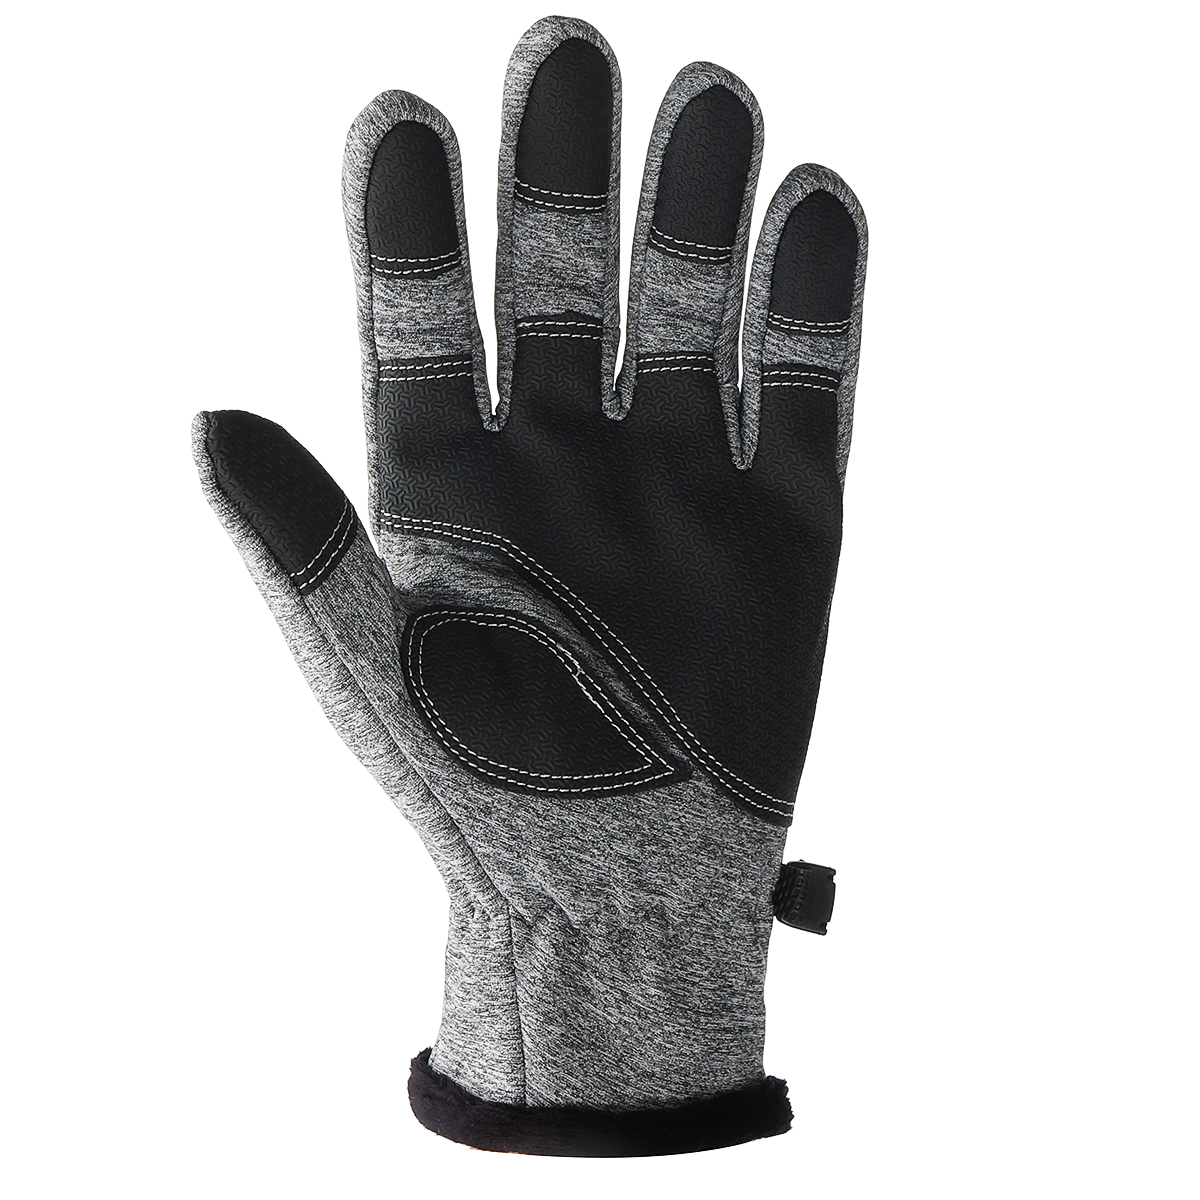 XL-Size-Winter-Warm-Waterproof-Windproof-Anti-Slip-Touch-Screen-Outdoors-Motorcycle-Riding-Gloves-1856137-6